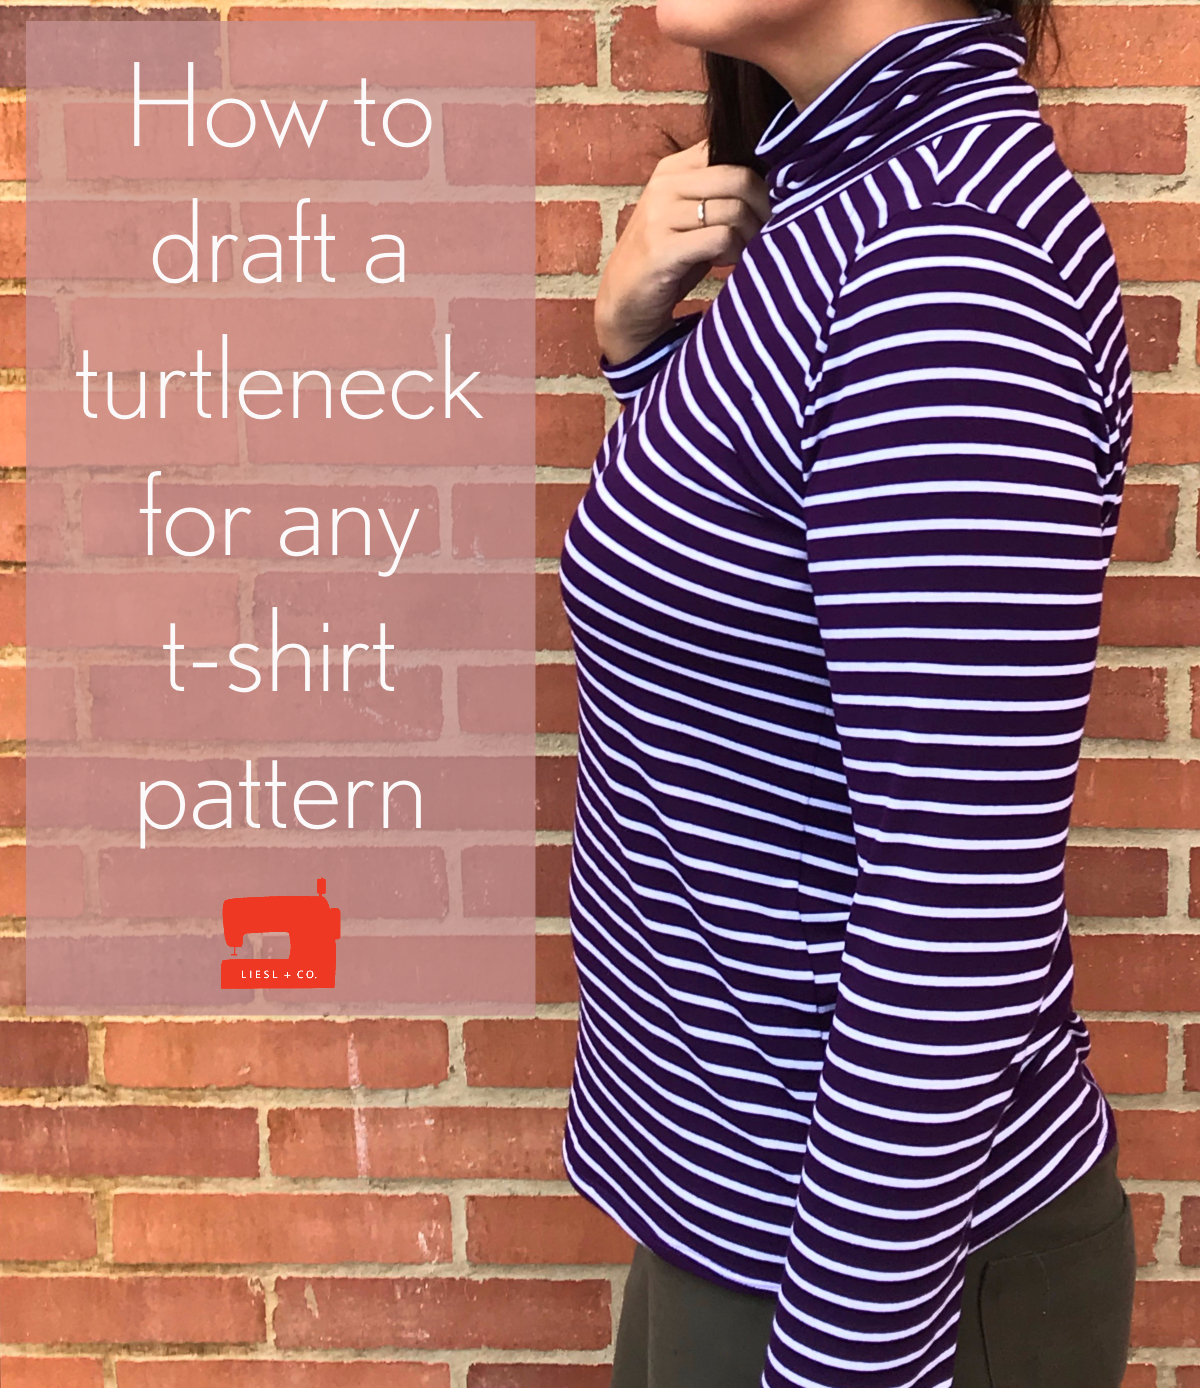 How to Draft a Turtleneck Using Any T-Shirt Pattern | Blog